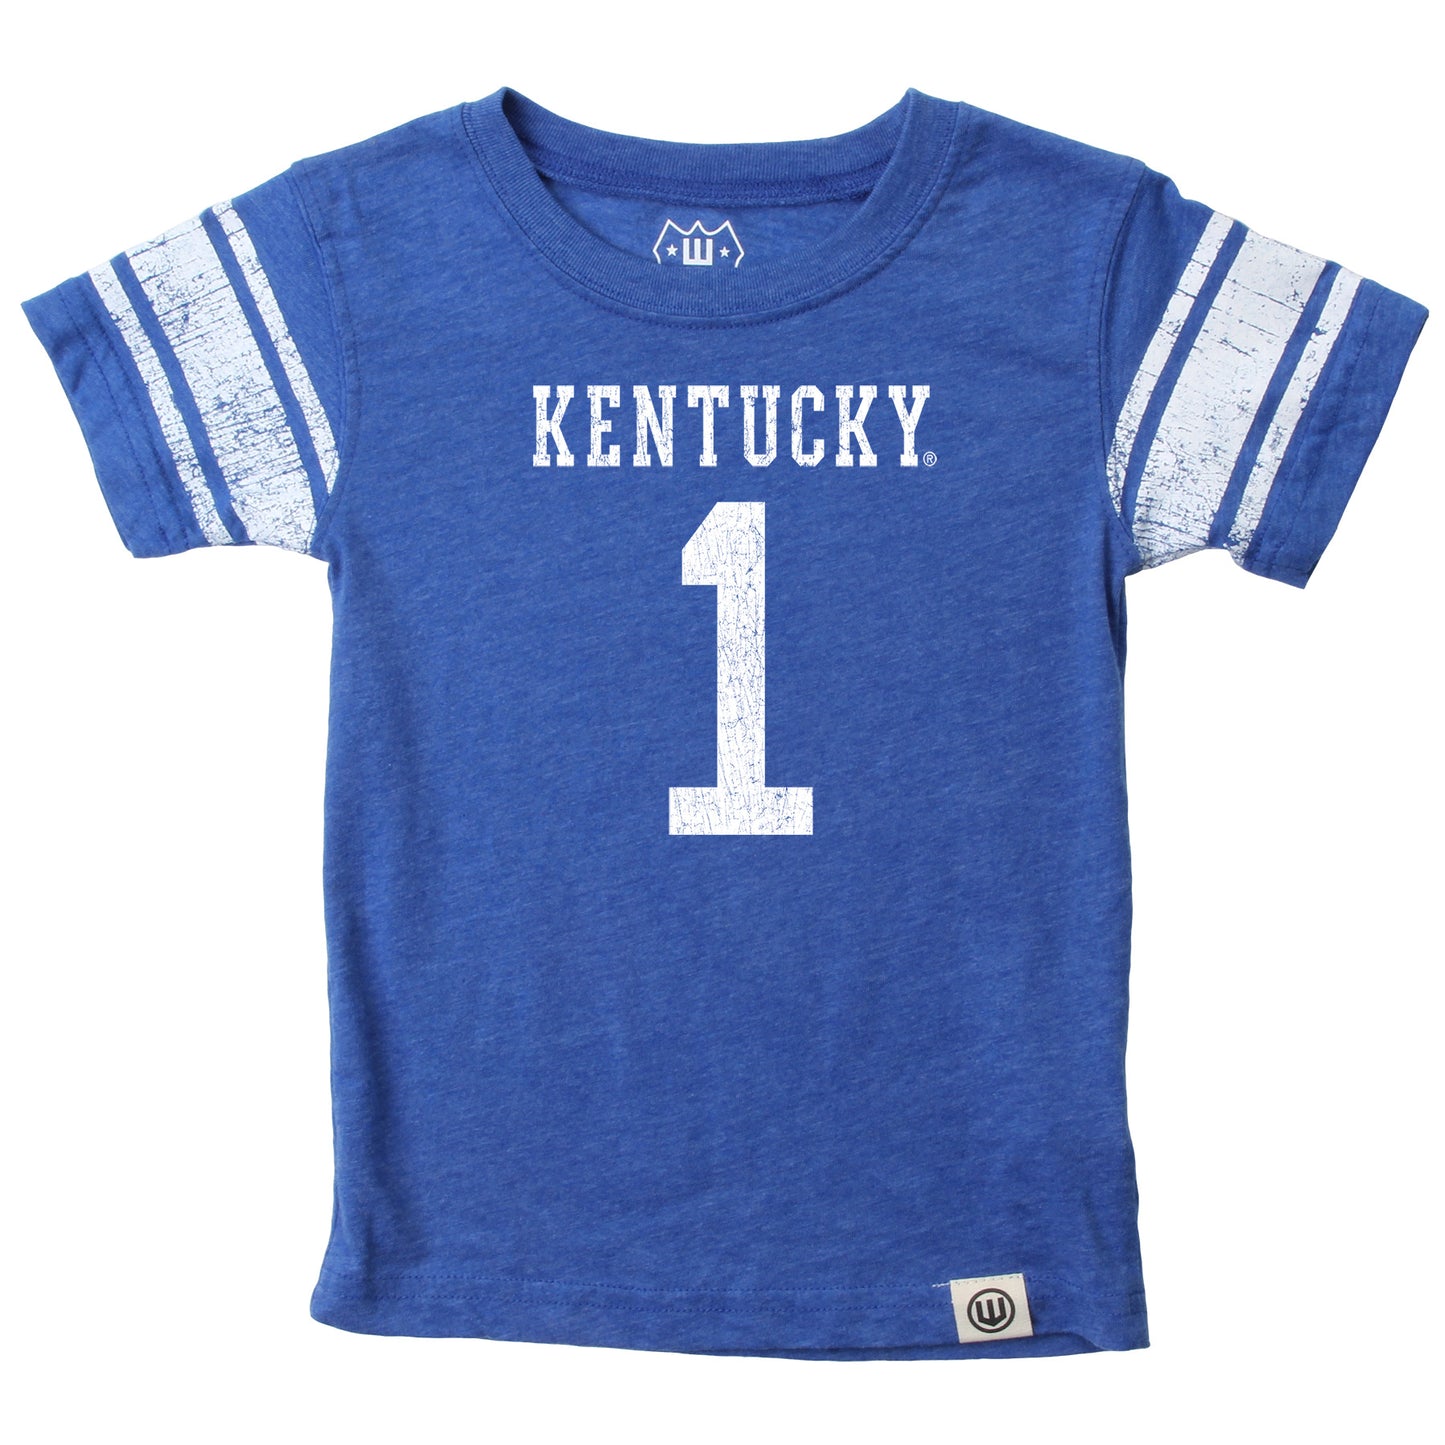 Kentucky Wildcats Wes and Willy Youth Boys College Short Sleeve Jersey T-Shirt